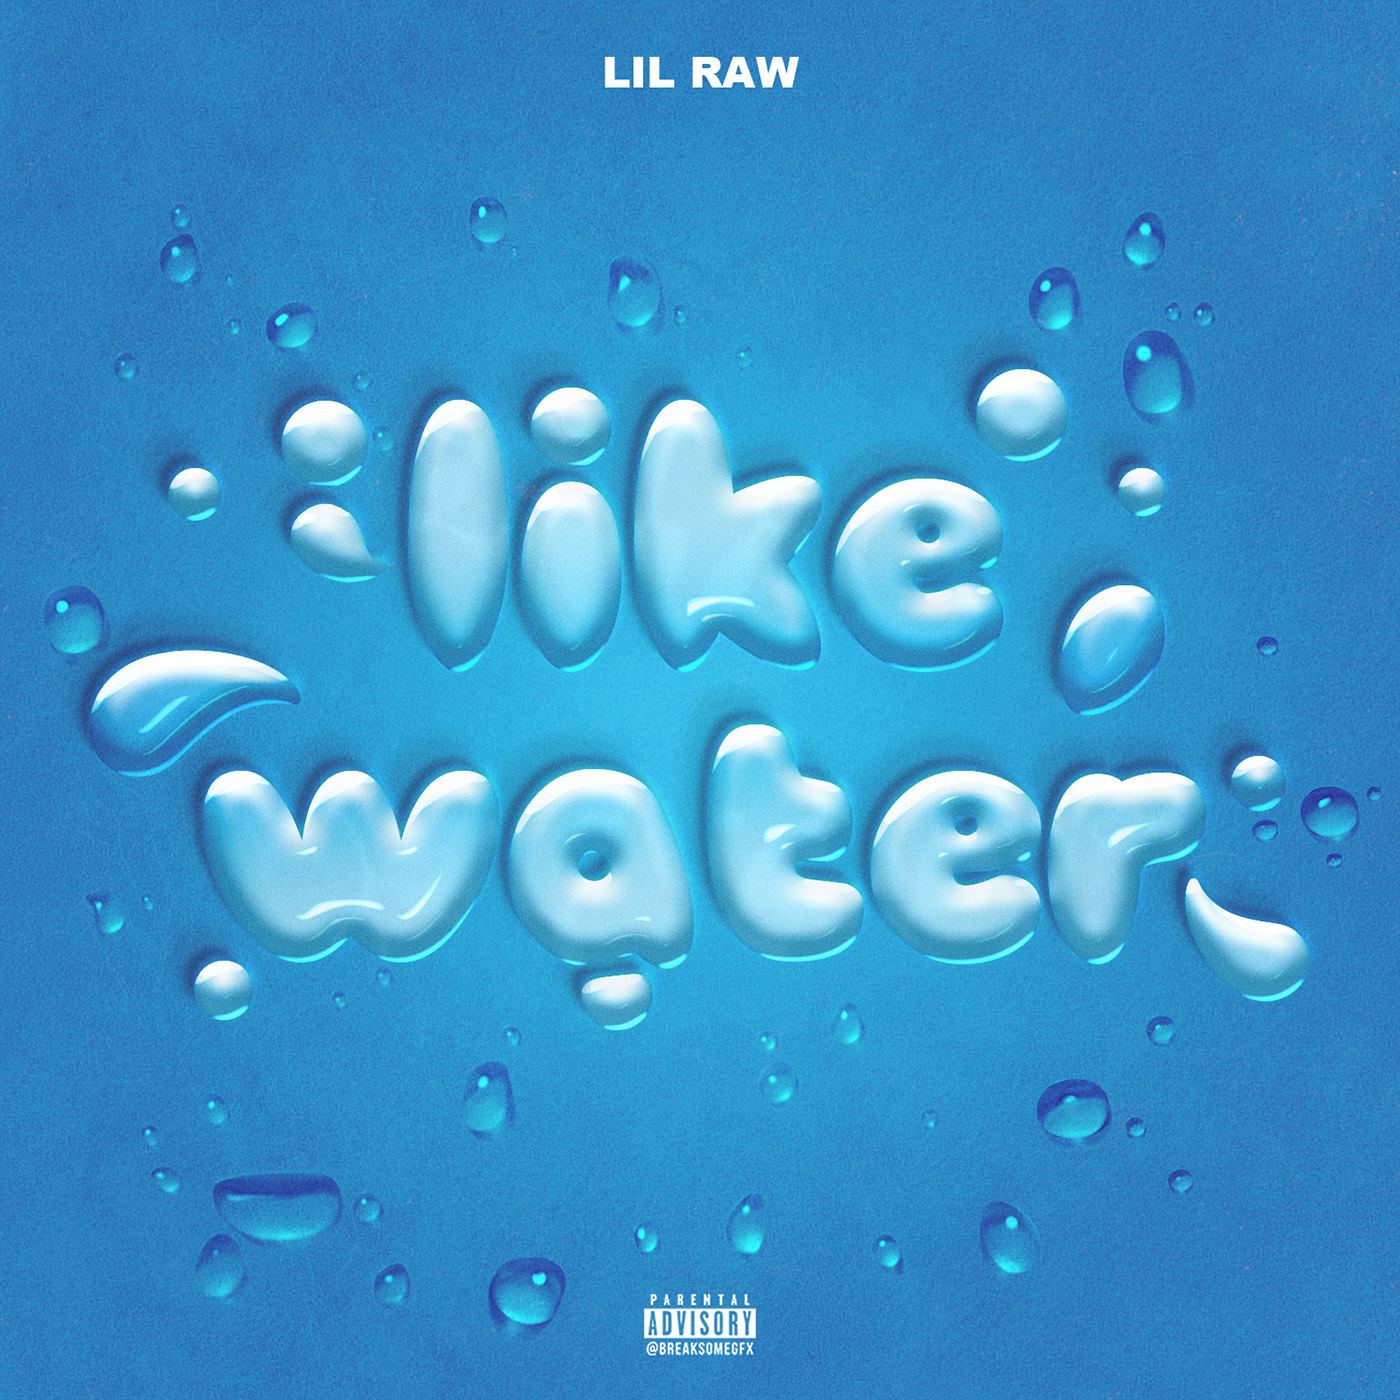 Lil Raw. A little Water. Как вода (like Water) (2011). Much Water little Water.